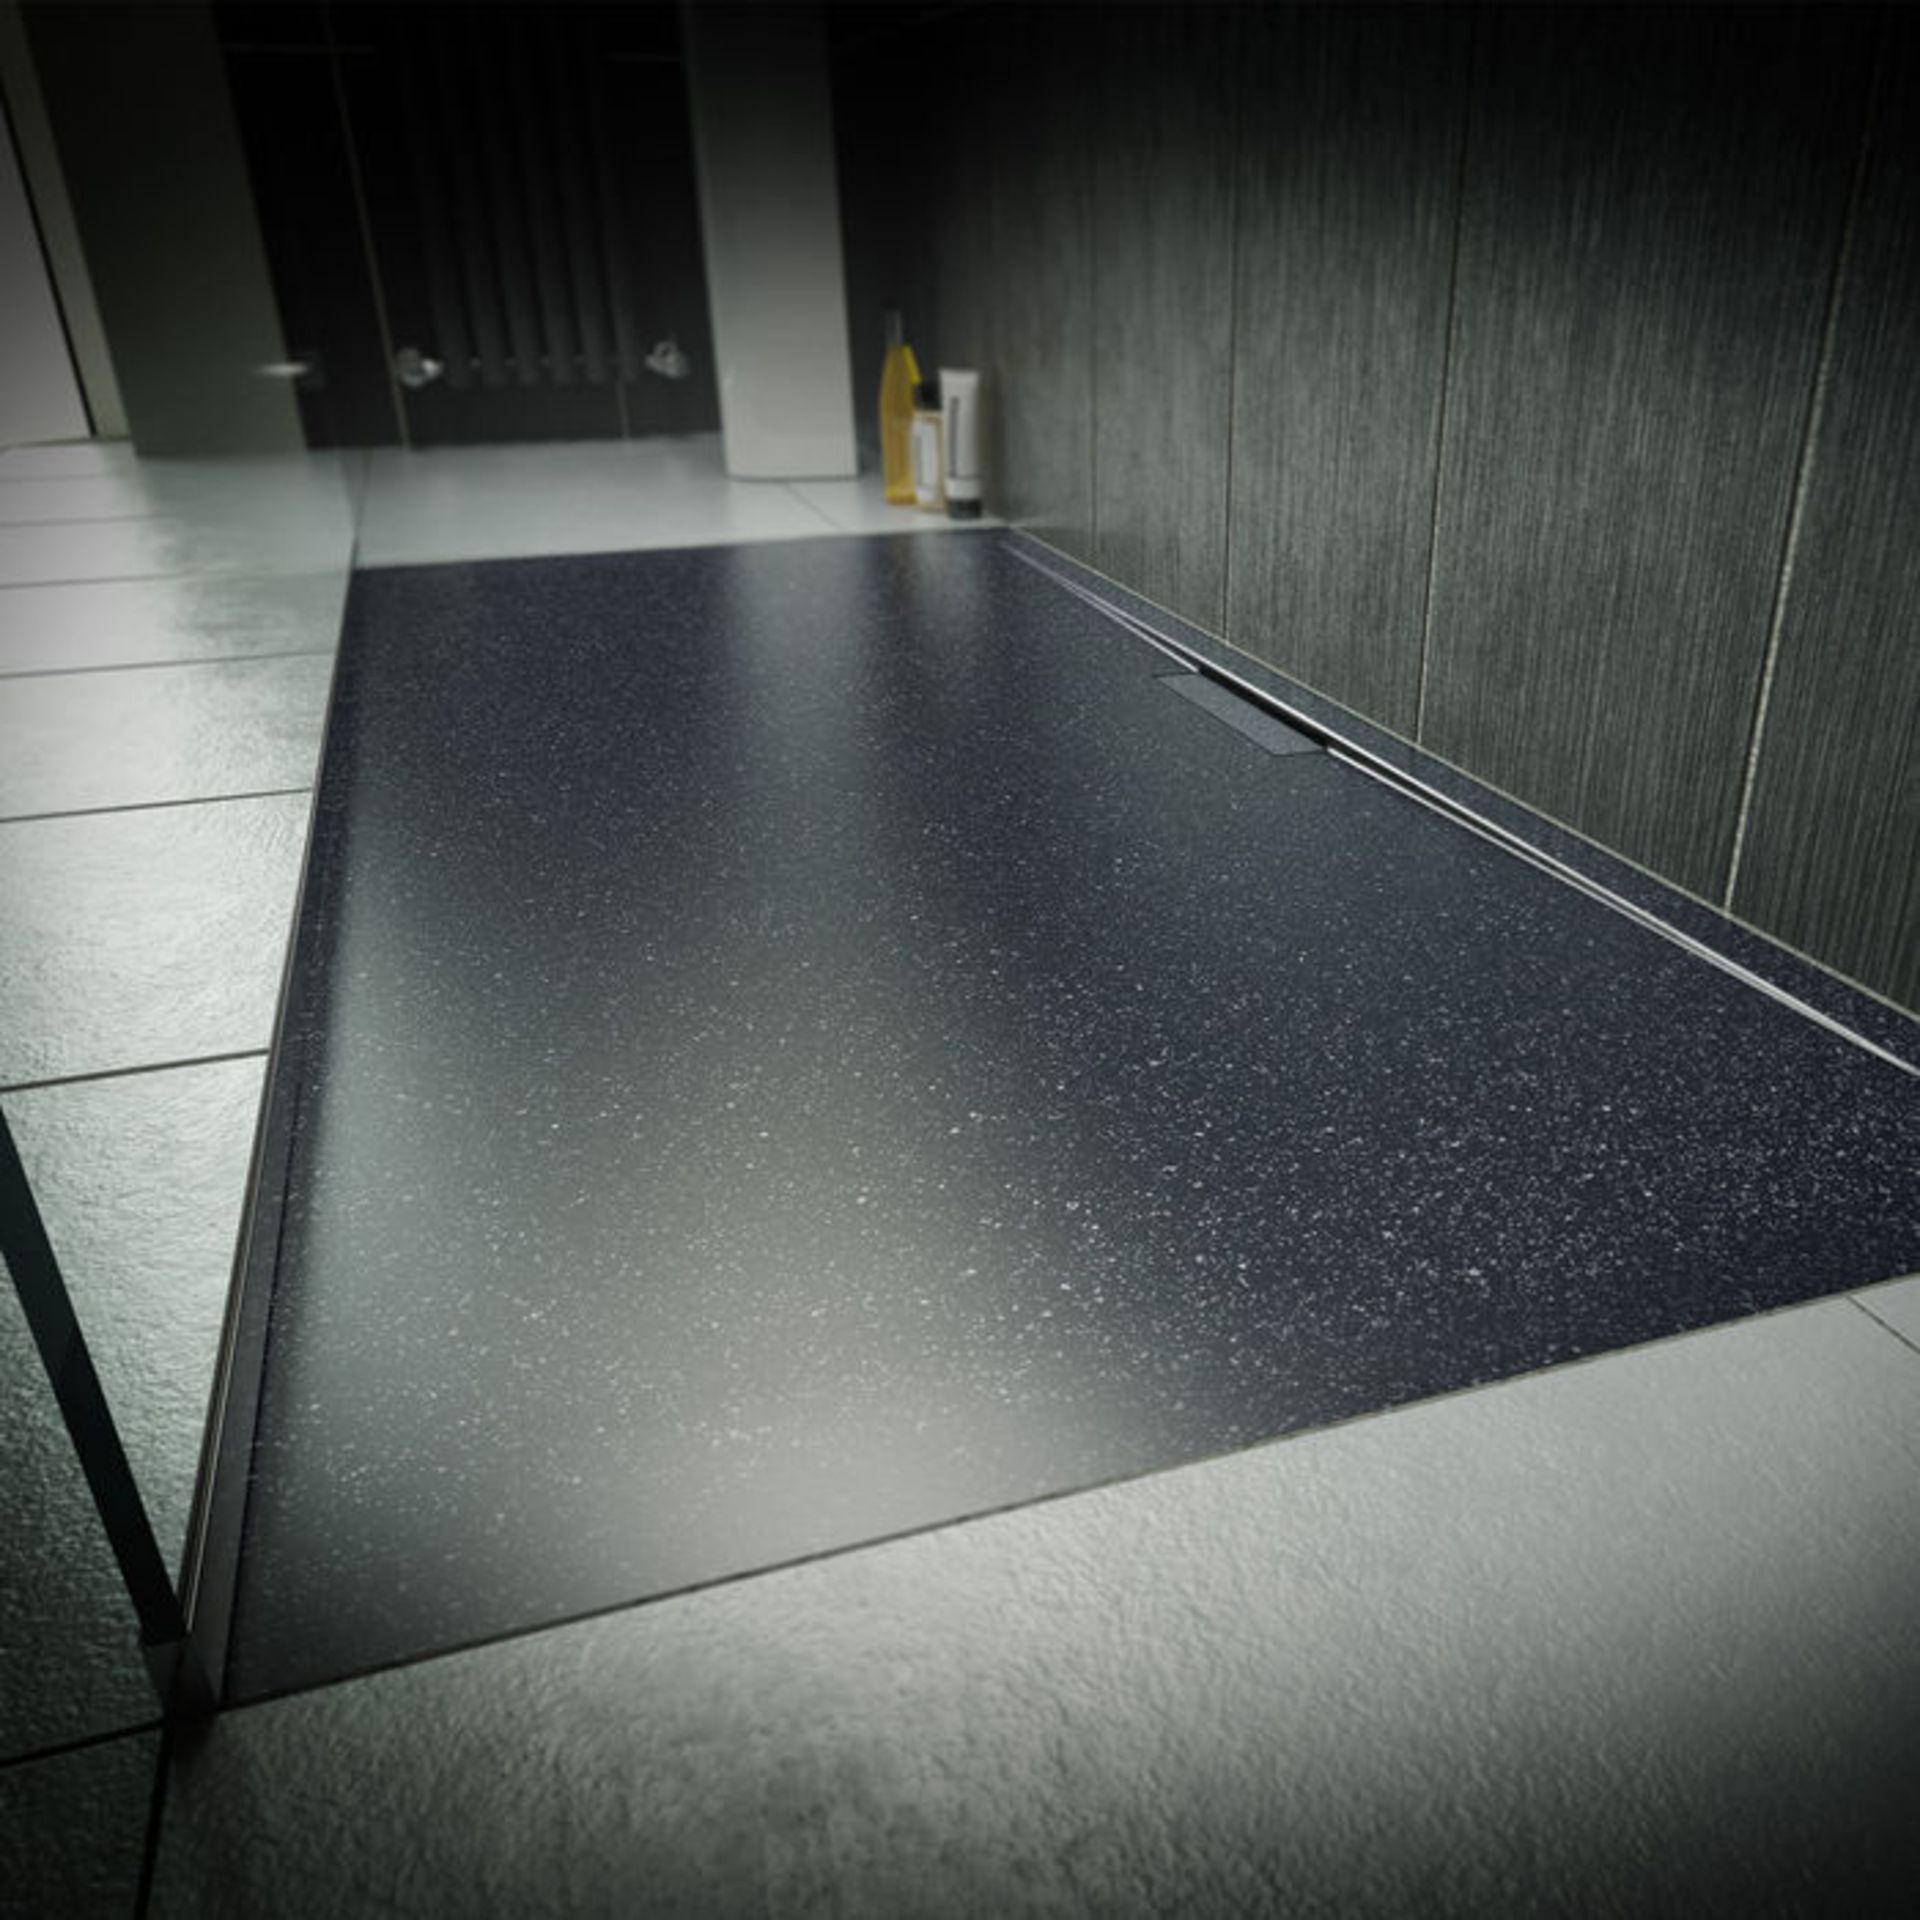 1200x800mm Luxe Ultra Slim Stone Shower Tray & Hidden Waste - Black. RRP £489.99. Manufactured in